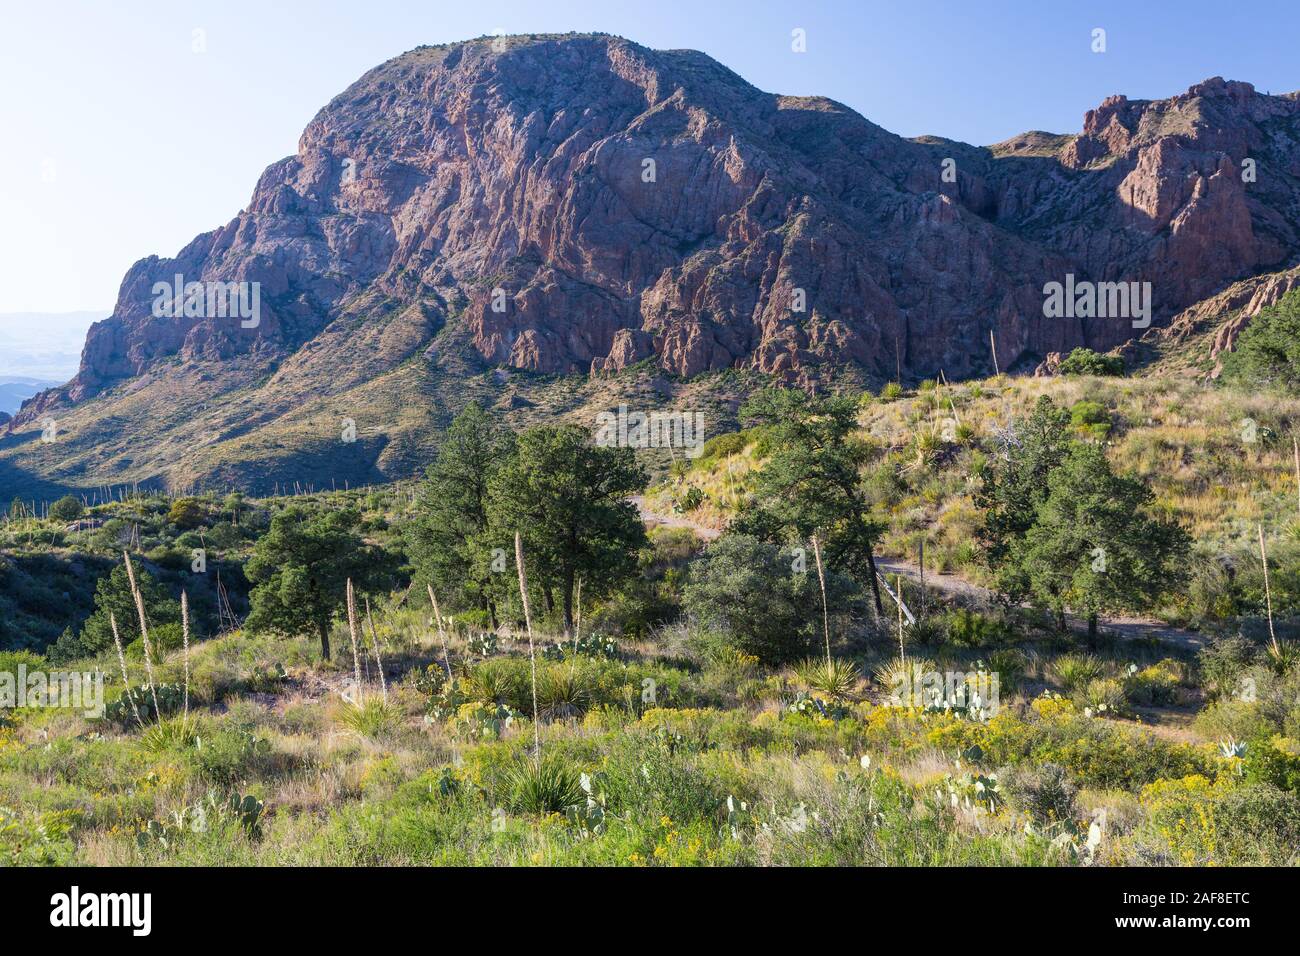 Big Bend National Park, Texas.  Bailey Peak, Chisos Mountains.  High Chihuahuan Desert Vegetation in foreground. Stock Photo